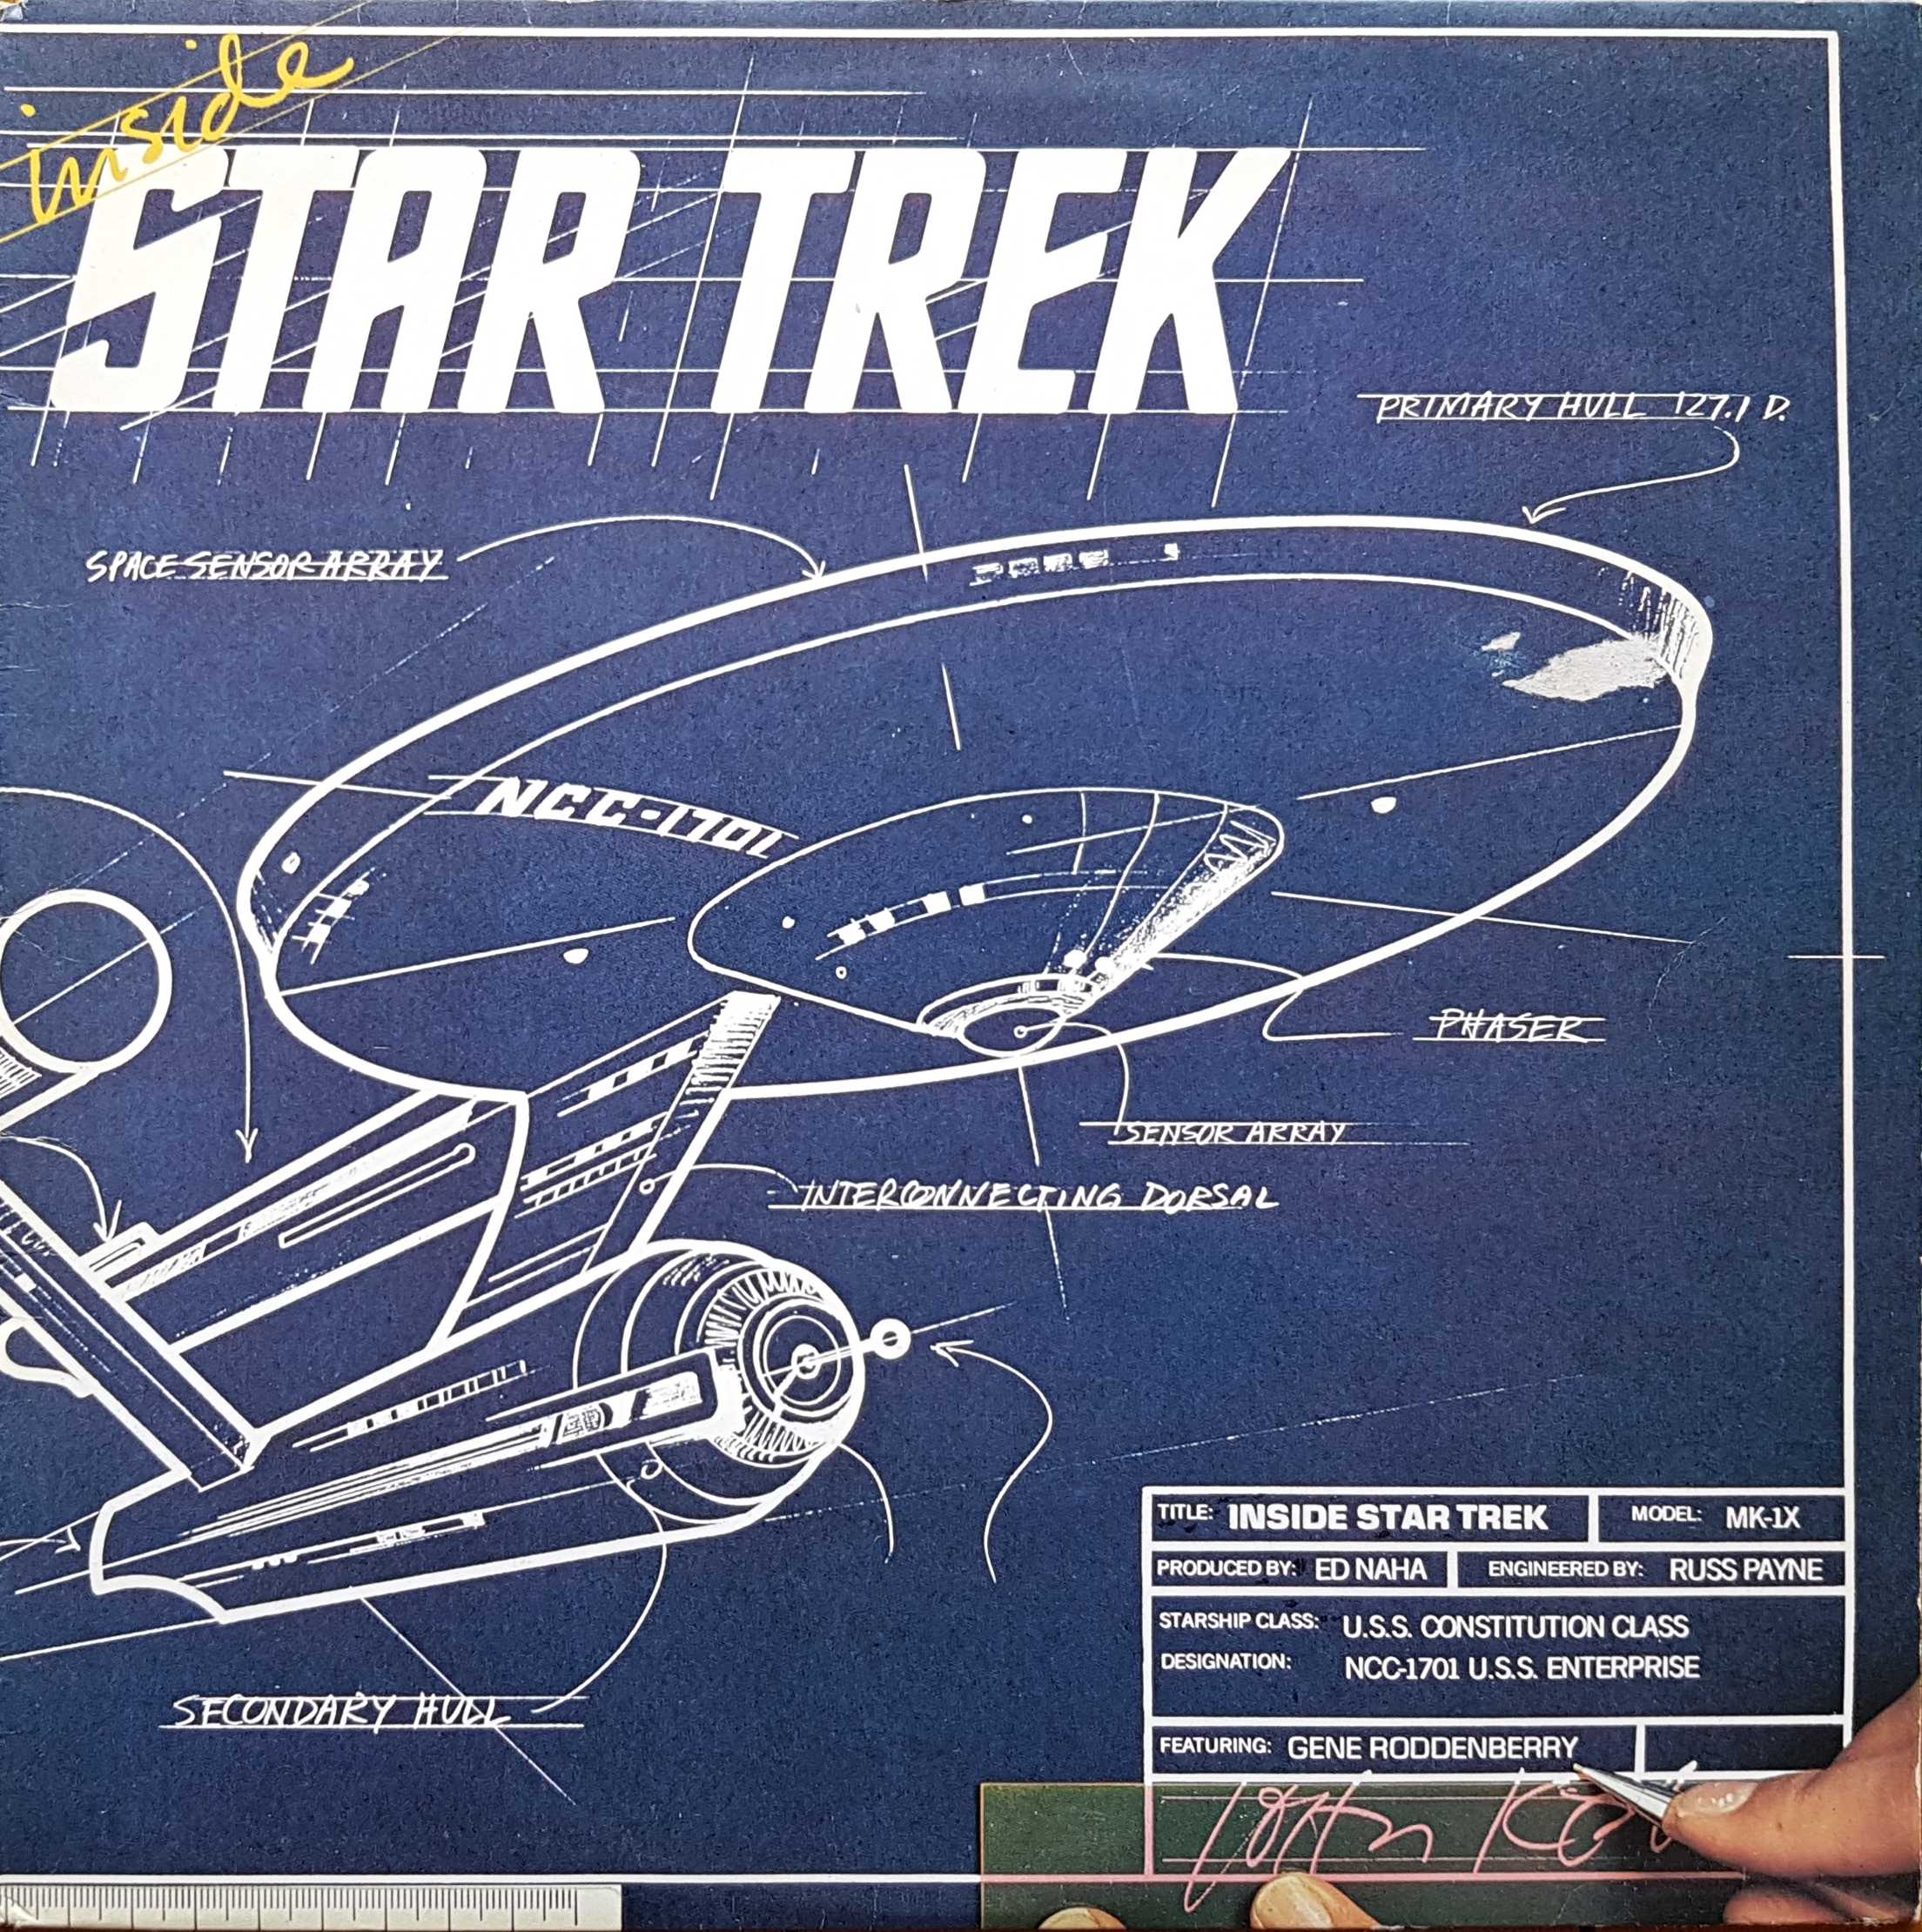 Picture of Inside star trek by artist Various from the BBC albums - Records and Tapes library